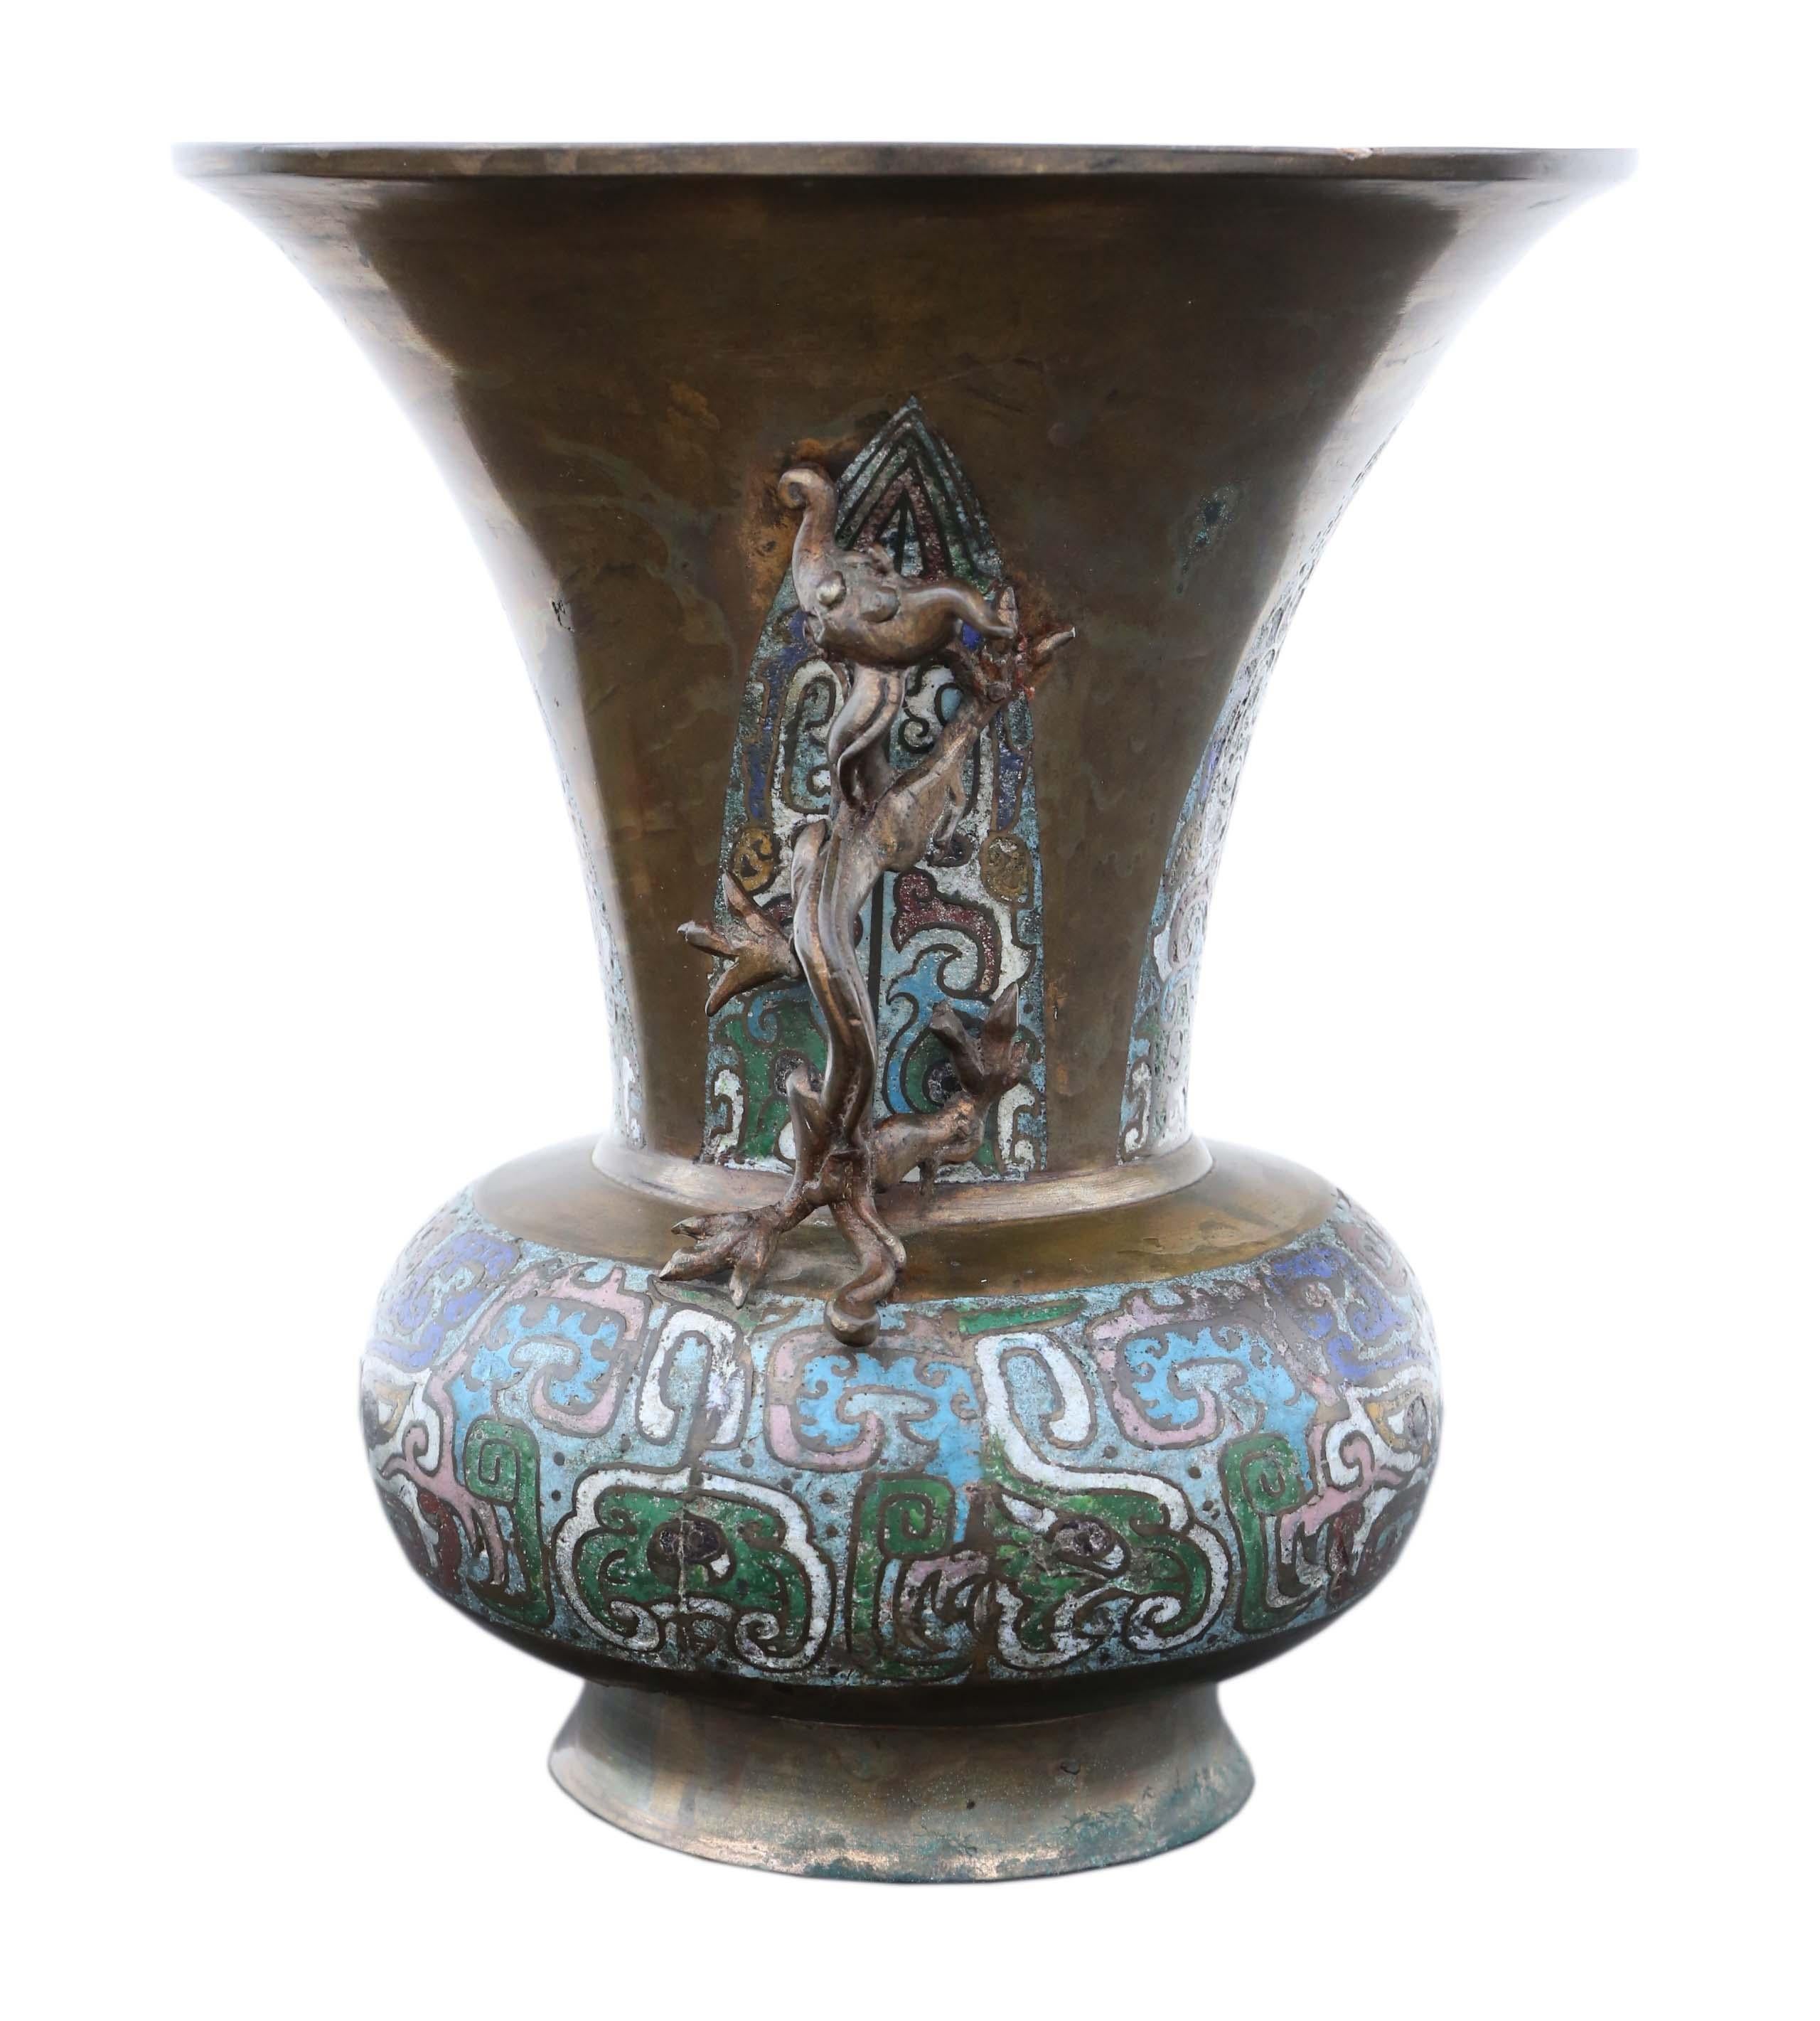 Antique large late 19th century quality Chinese bronze champleve vase.

Would look amazing in the right location. Best color and patina. Rare large size and design.

Overall maximum dimensions: 25.5cm diameter x 29cm high (10cm inner throat).